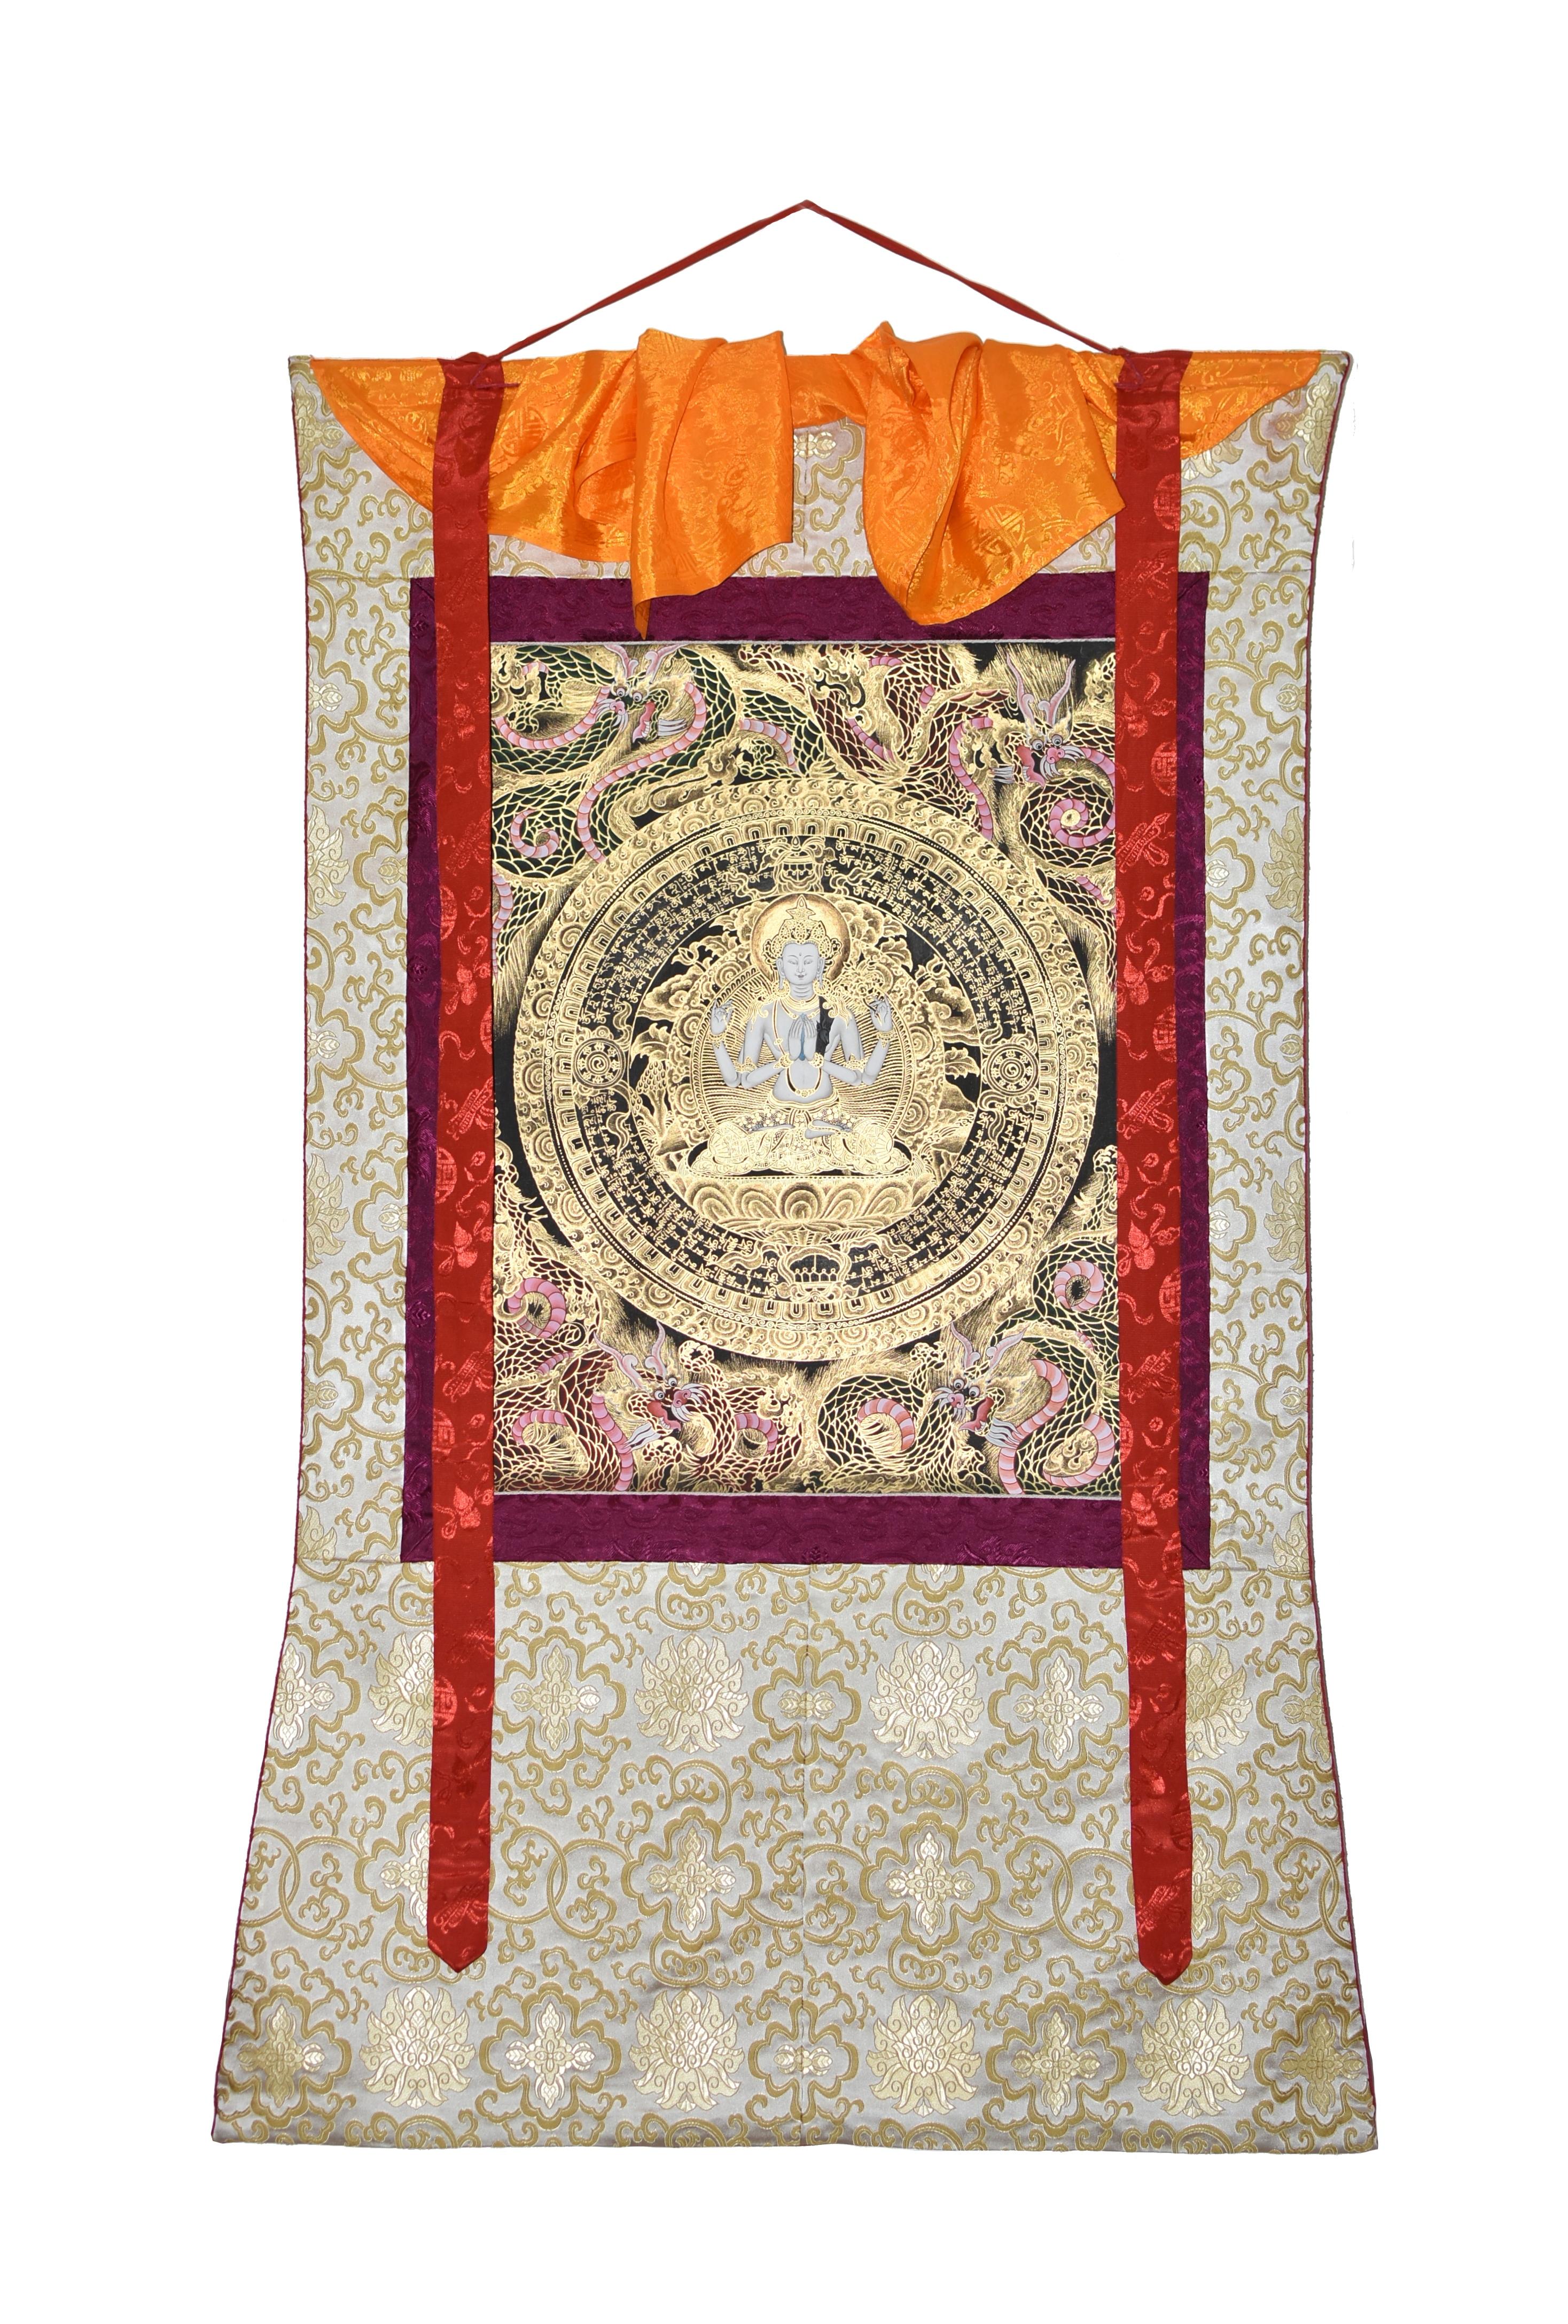 A very finely painted, rare Tibetan Thangka featuring the God of Compassion Chenrezig, the male form of Avalokitesvara and Guan Yin in Chinese Buddhism. Seated regally dhyana asana on the lotus throne in the center of the mandala, Chenrezig is